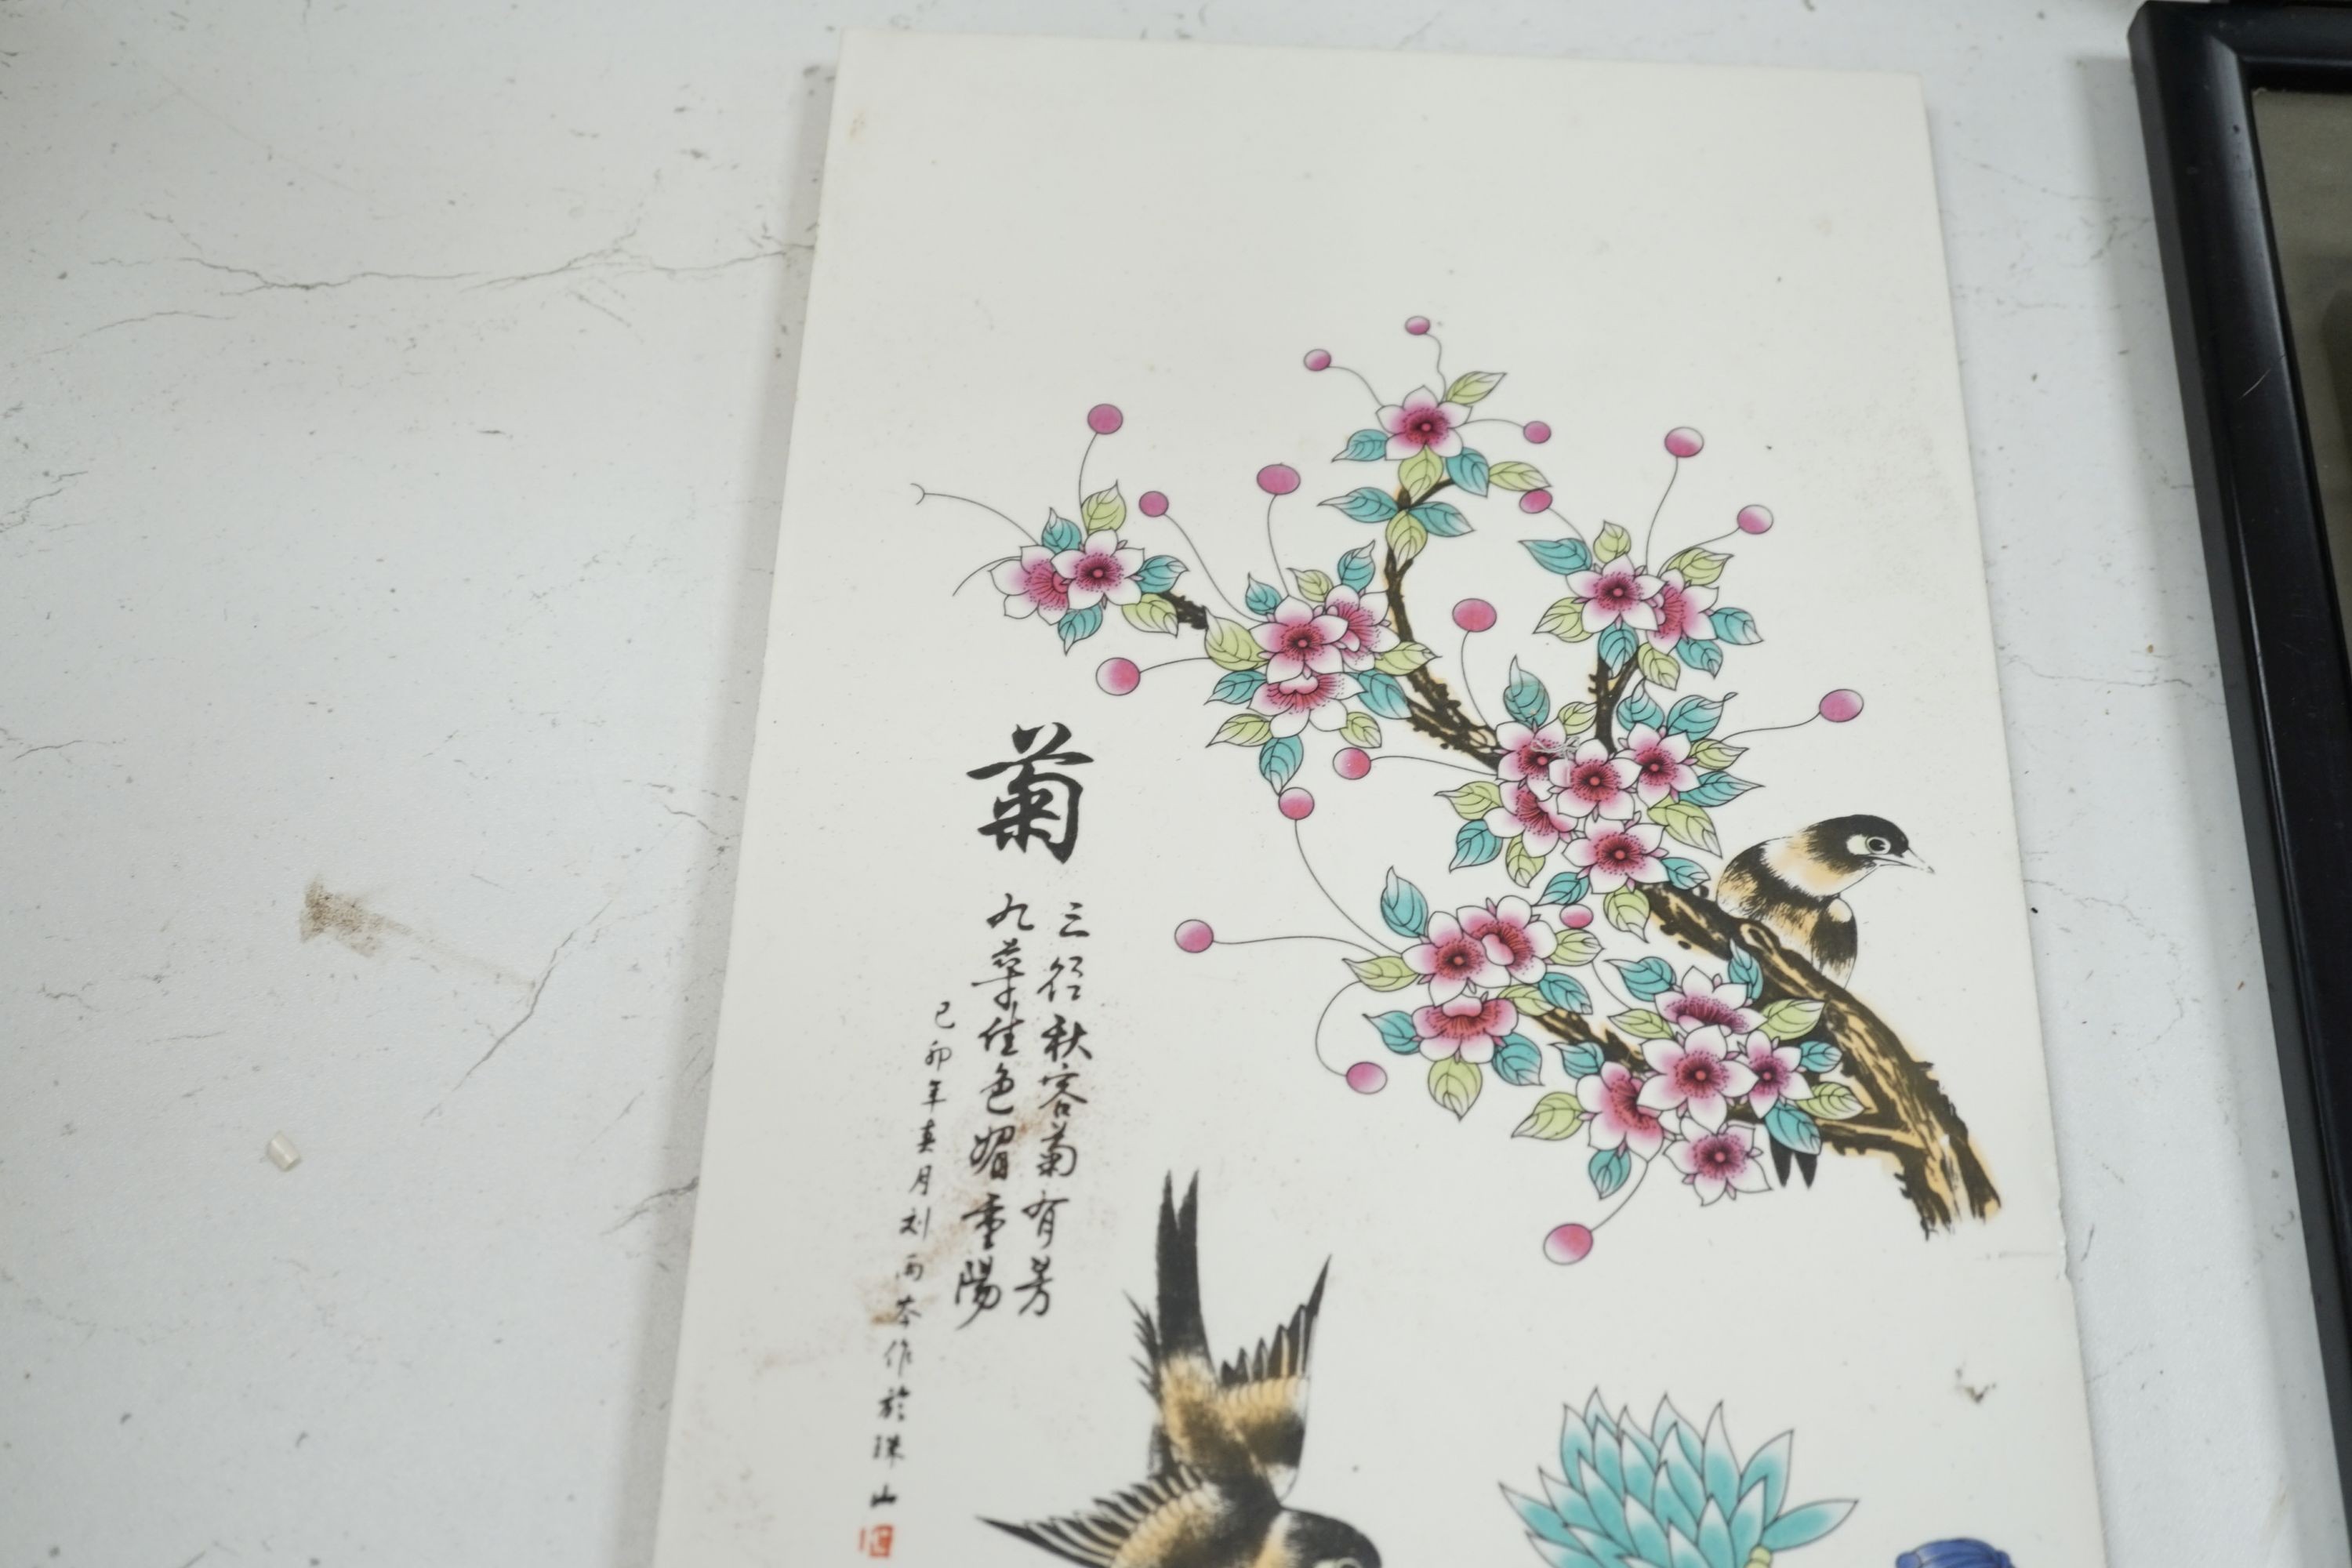 A Chinese enamelled tile, decorated with birds and flowers, 75 cms high x 22 cms wide.